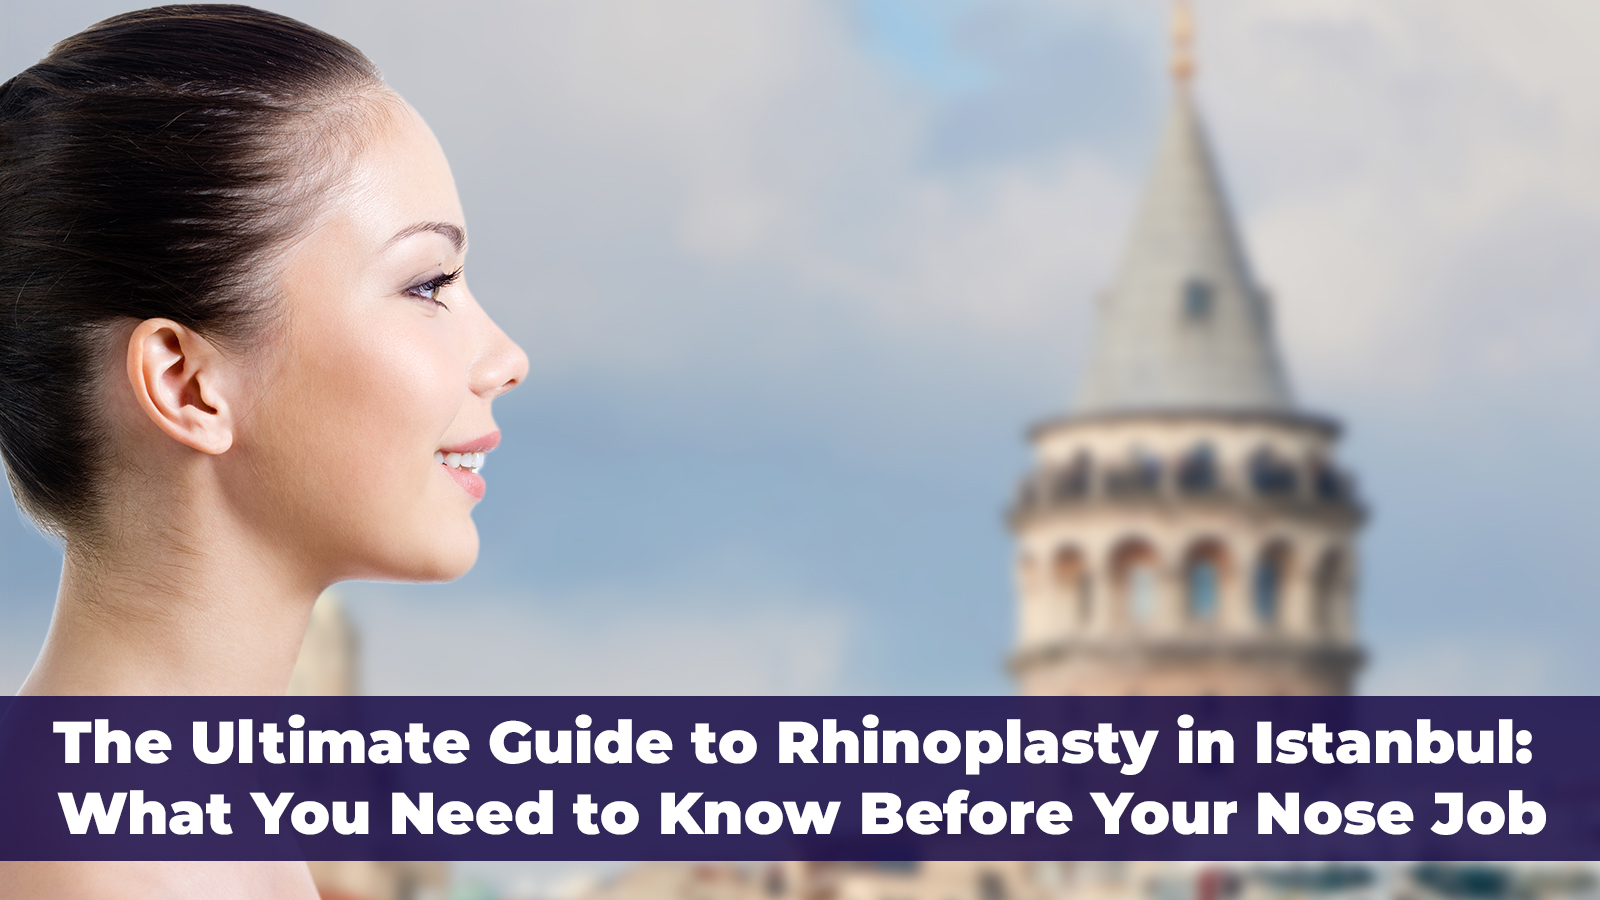 The Ultimate Guide to Rhinoplasty in Istanbul: What You Need to Know Before Your Nose Job